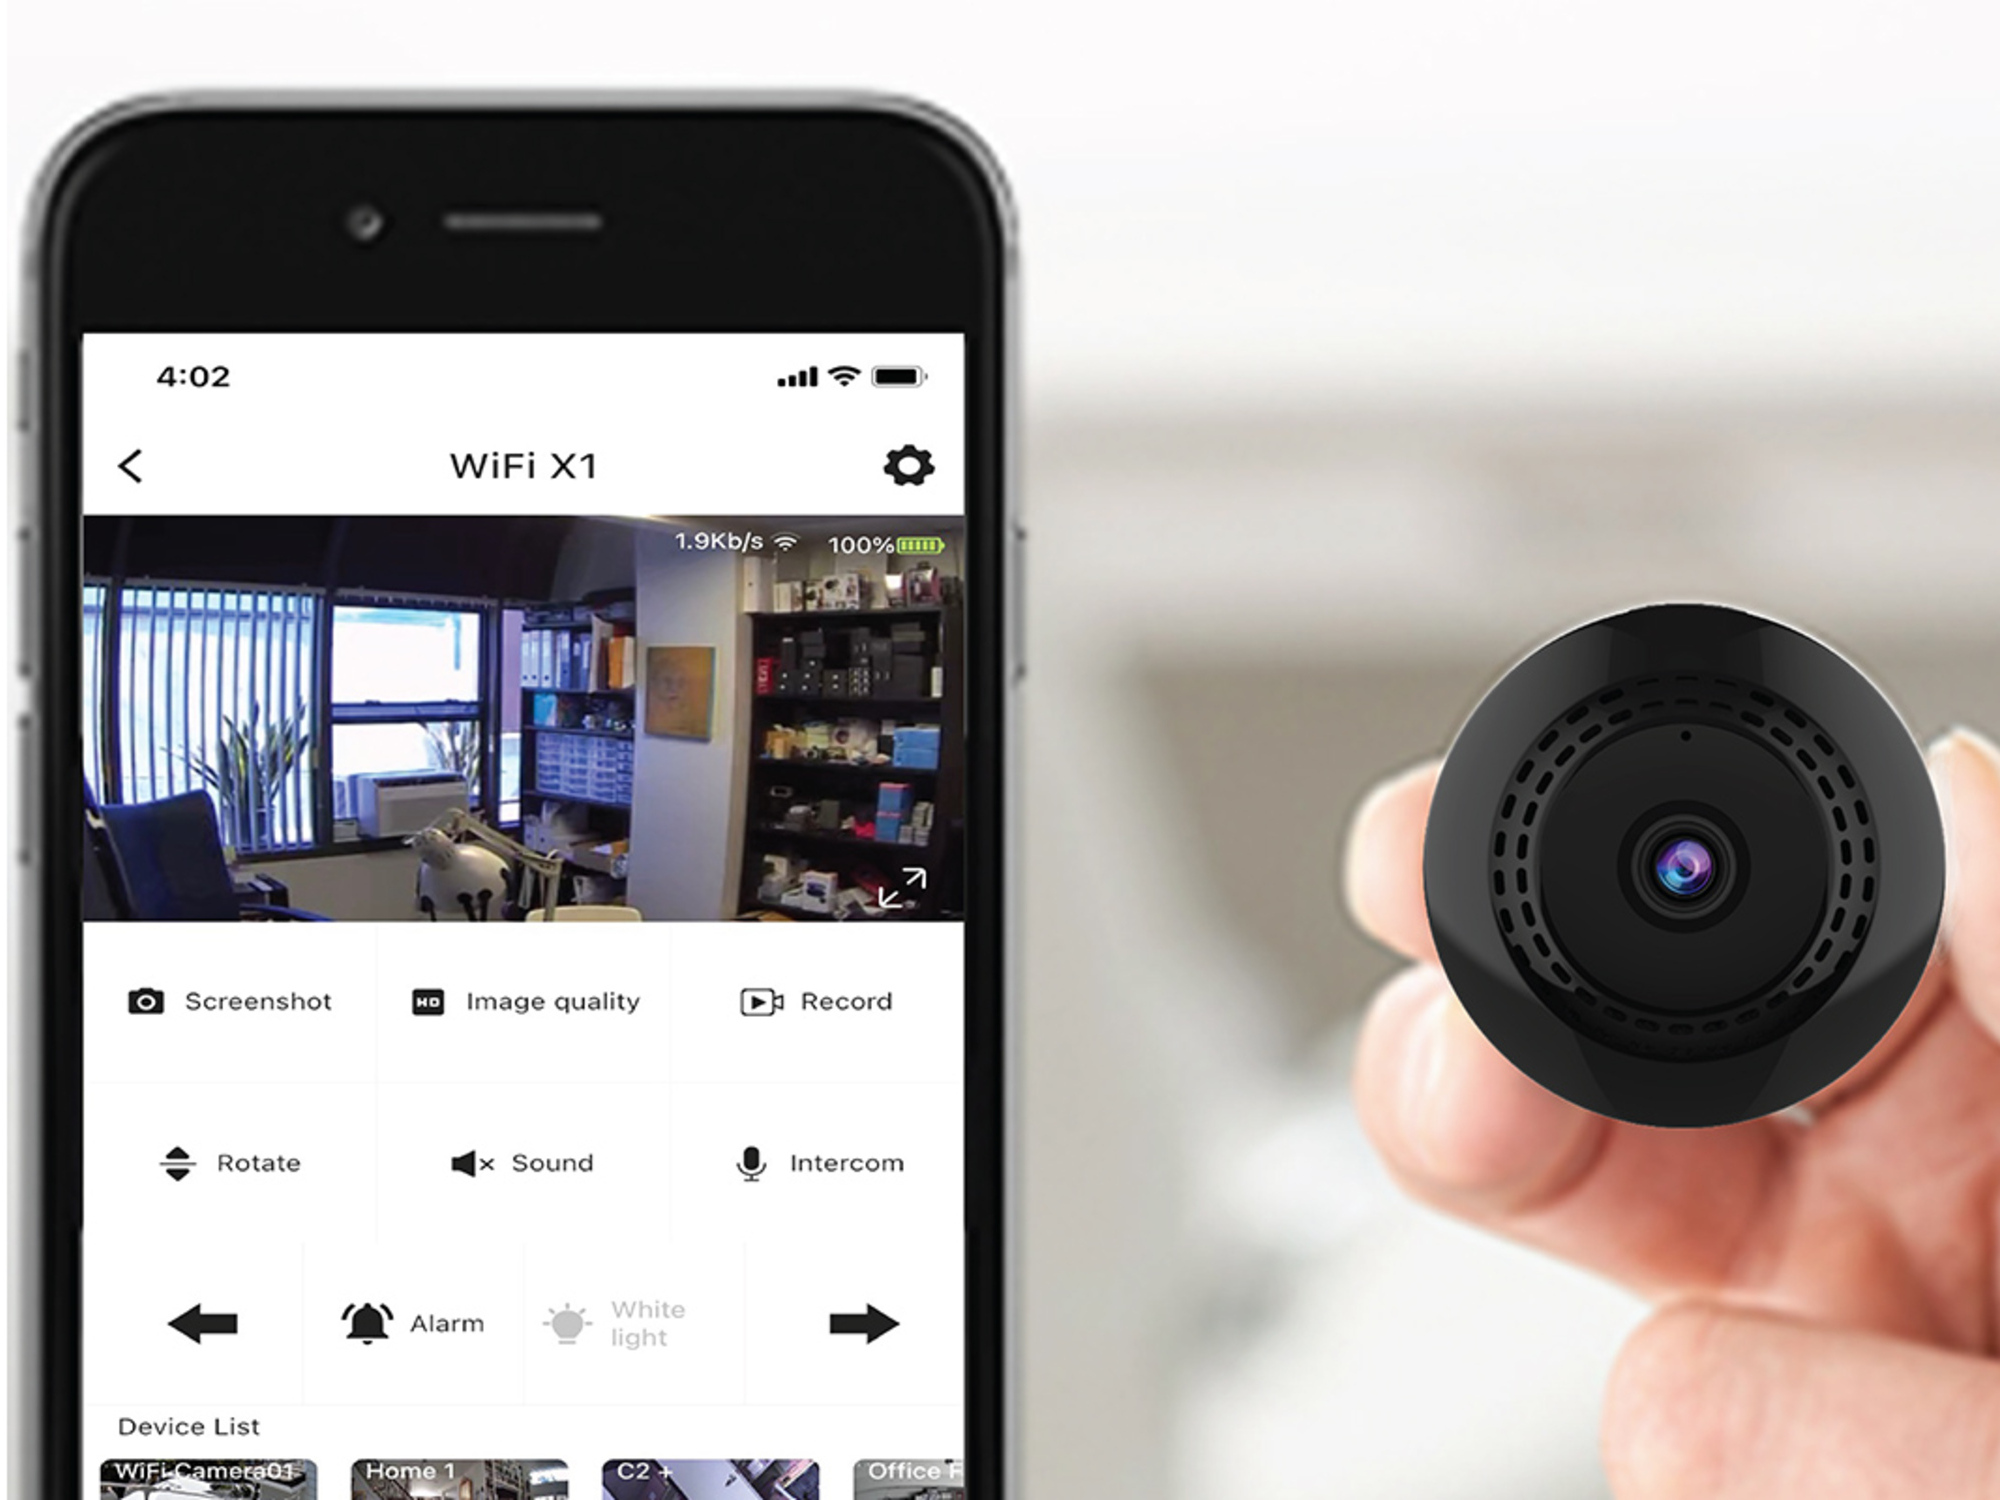 This WiFi camera is 20 percent off with code WINTER20